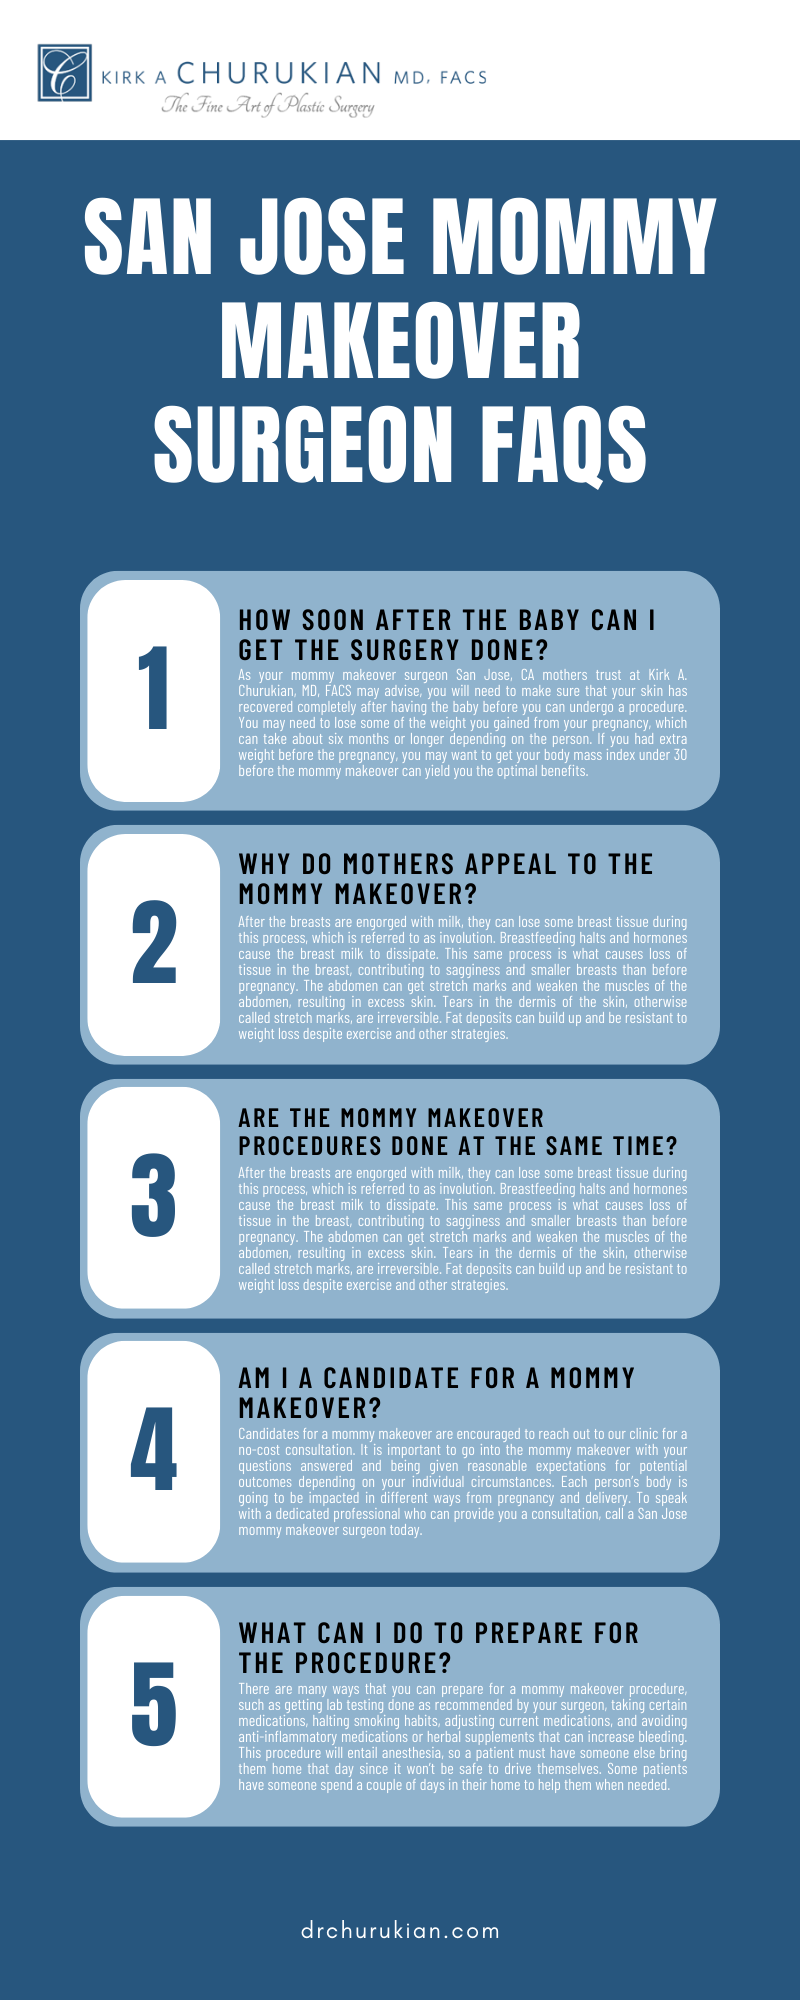 SAN JOSE MOMMY MAKEOVER SURGEON FAQS INFOGRAPHIC